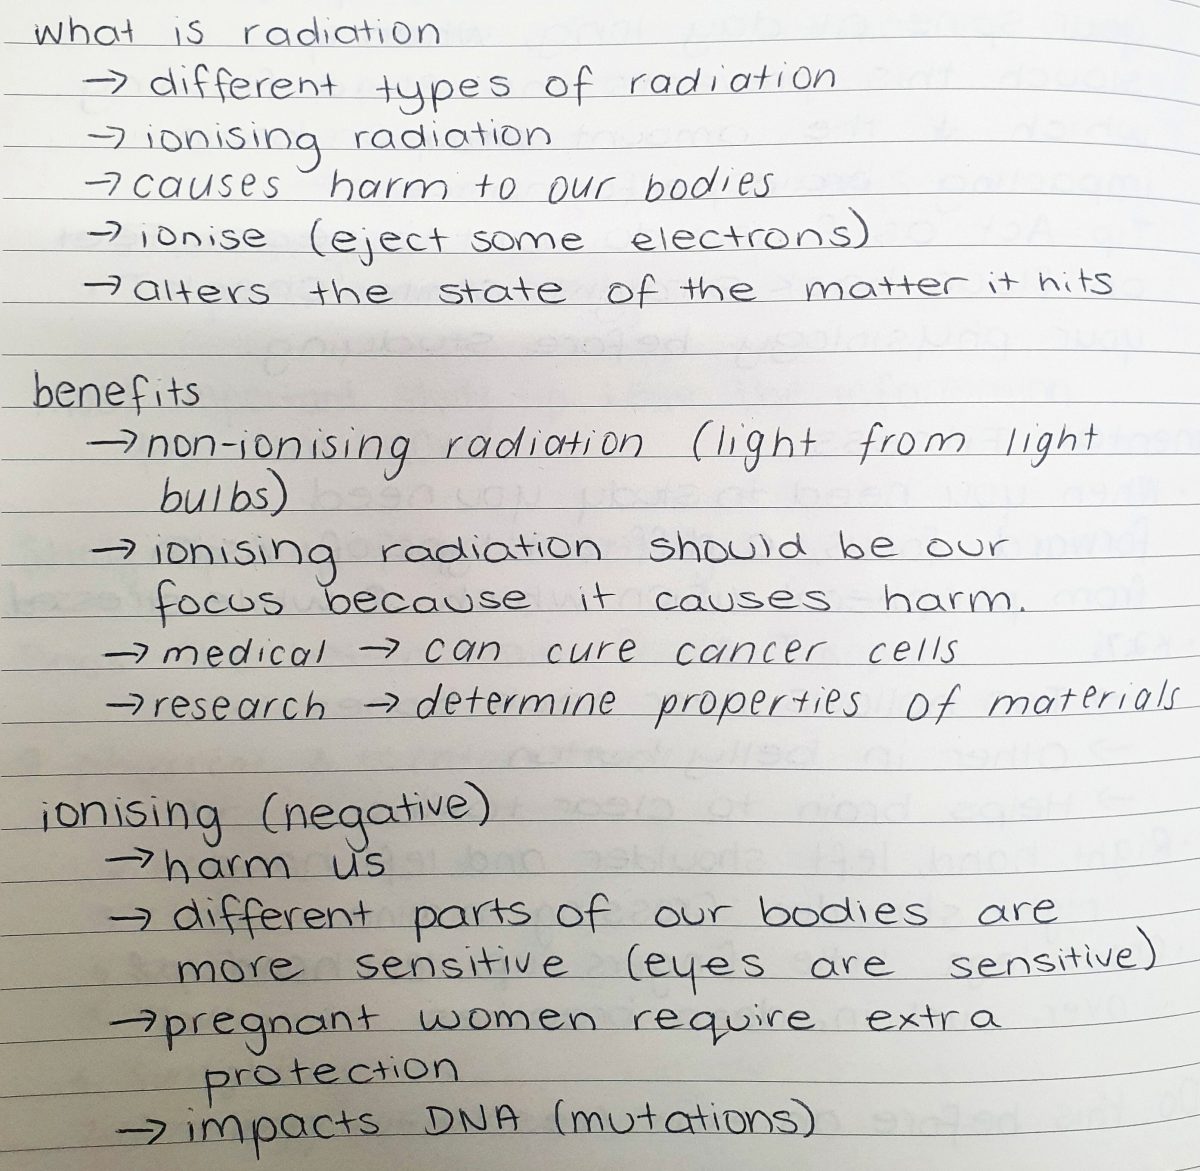 Radiation interview notes